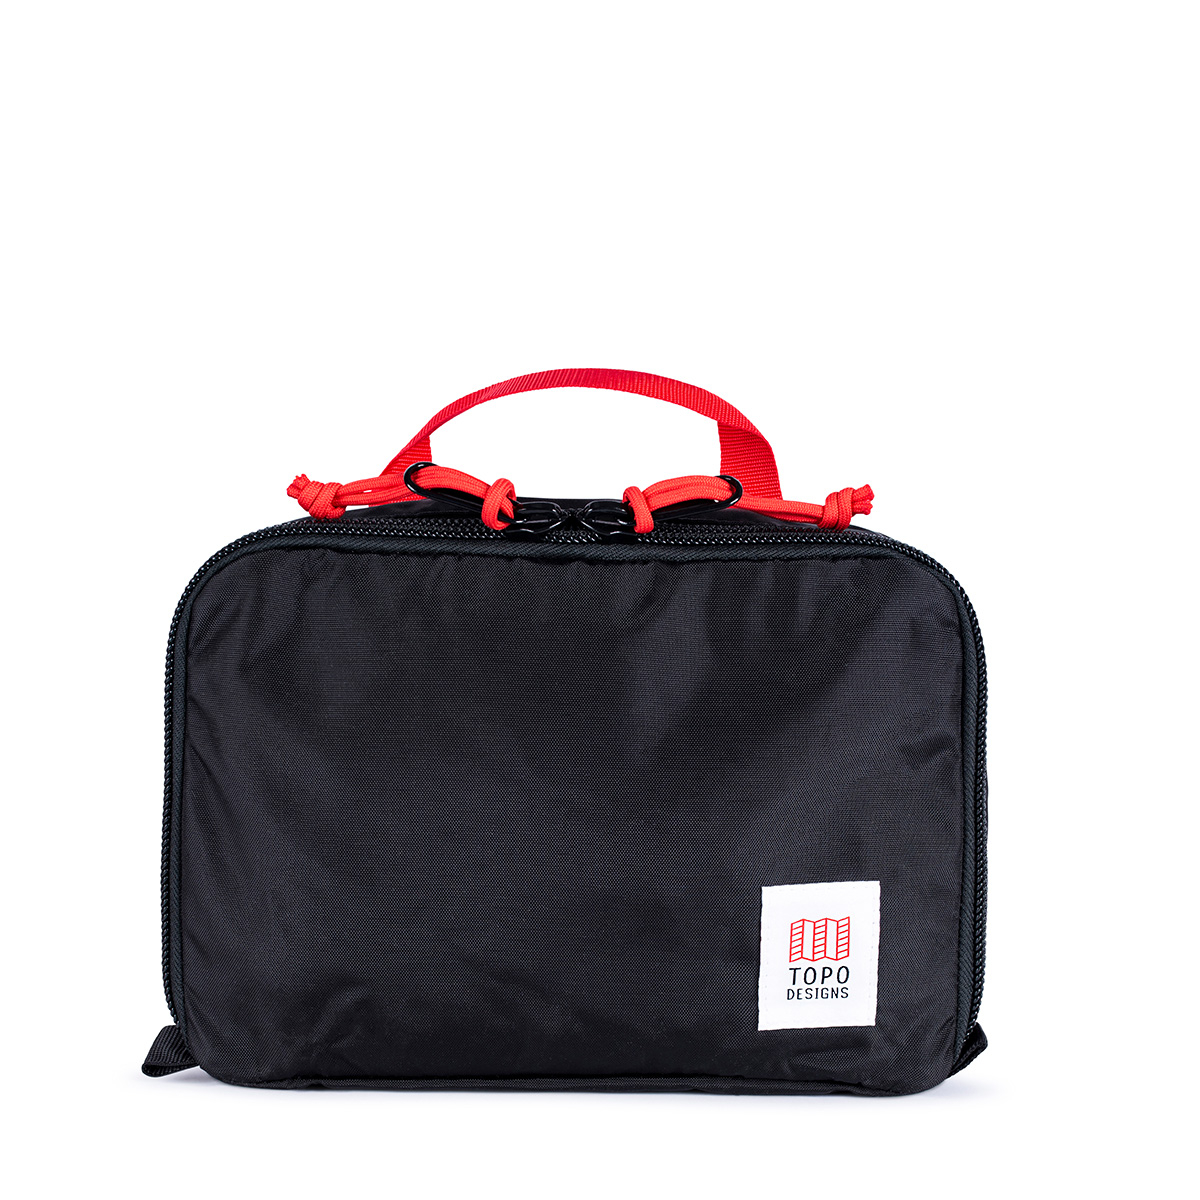 Topo Designs Pack Bag 5L Black, a simple, durable and highly functional way to organize your luggage